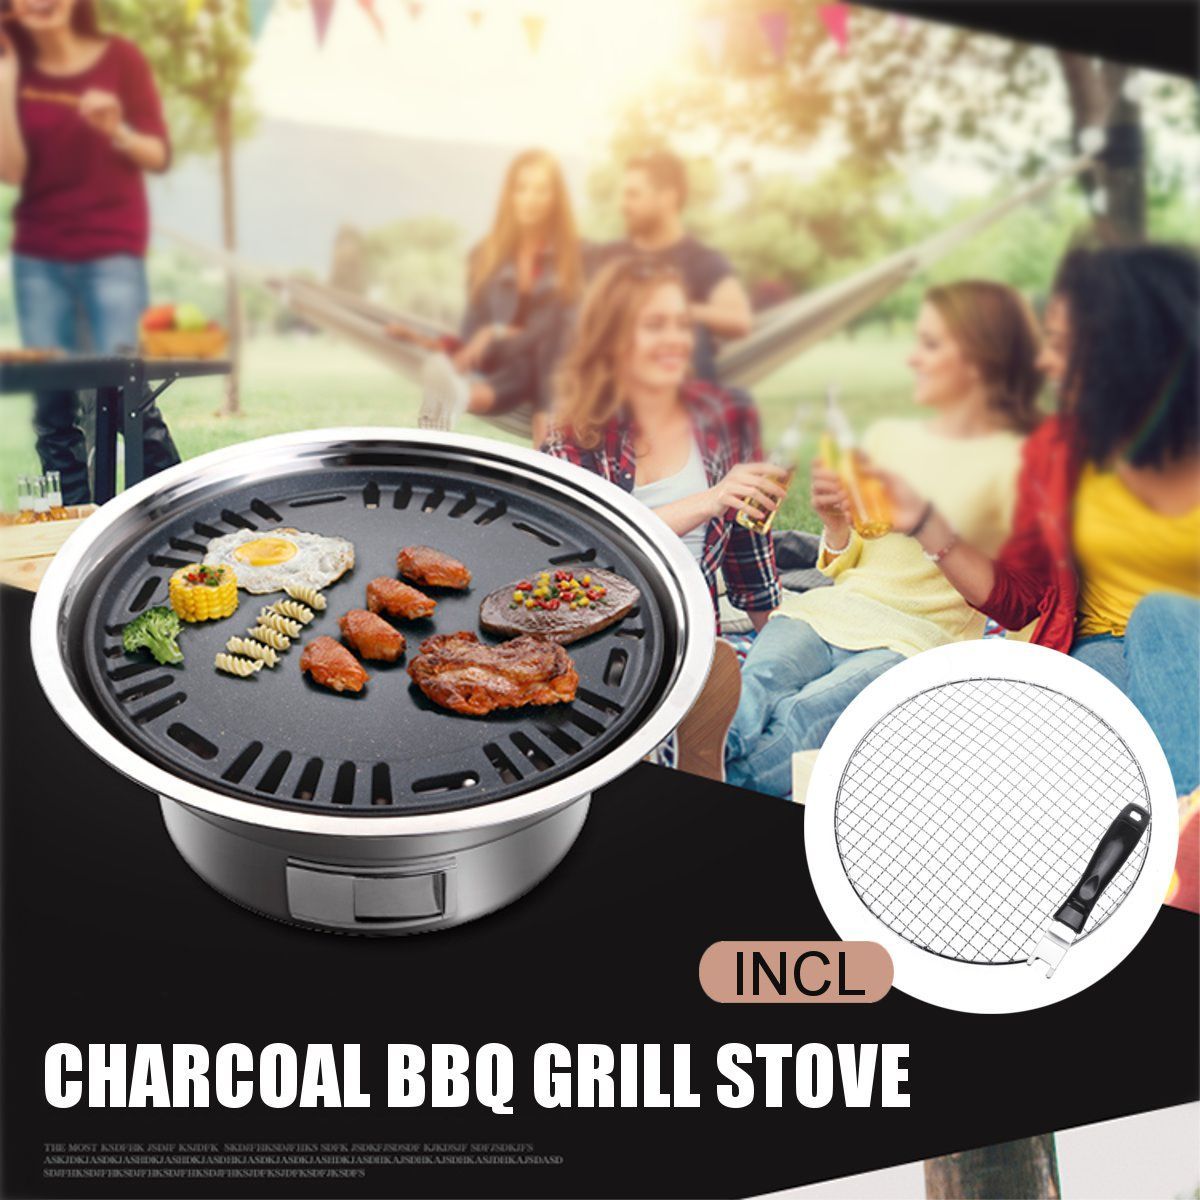 39x23x15cm-Samgyupsal-Samgyeopsal-Korean-Grill-Pan-Cooking-Stove-Top-Barbecue-BBQ-with-33cm-Net-Plat-1586952